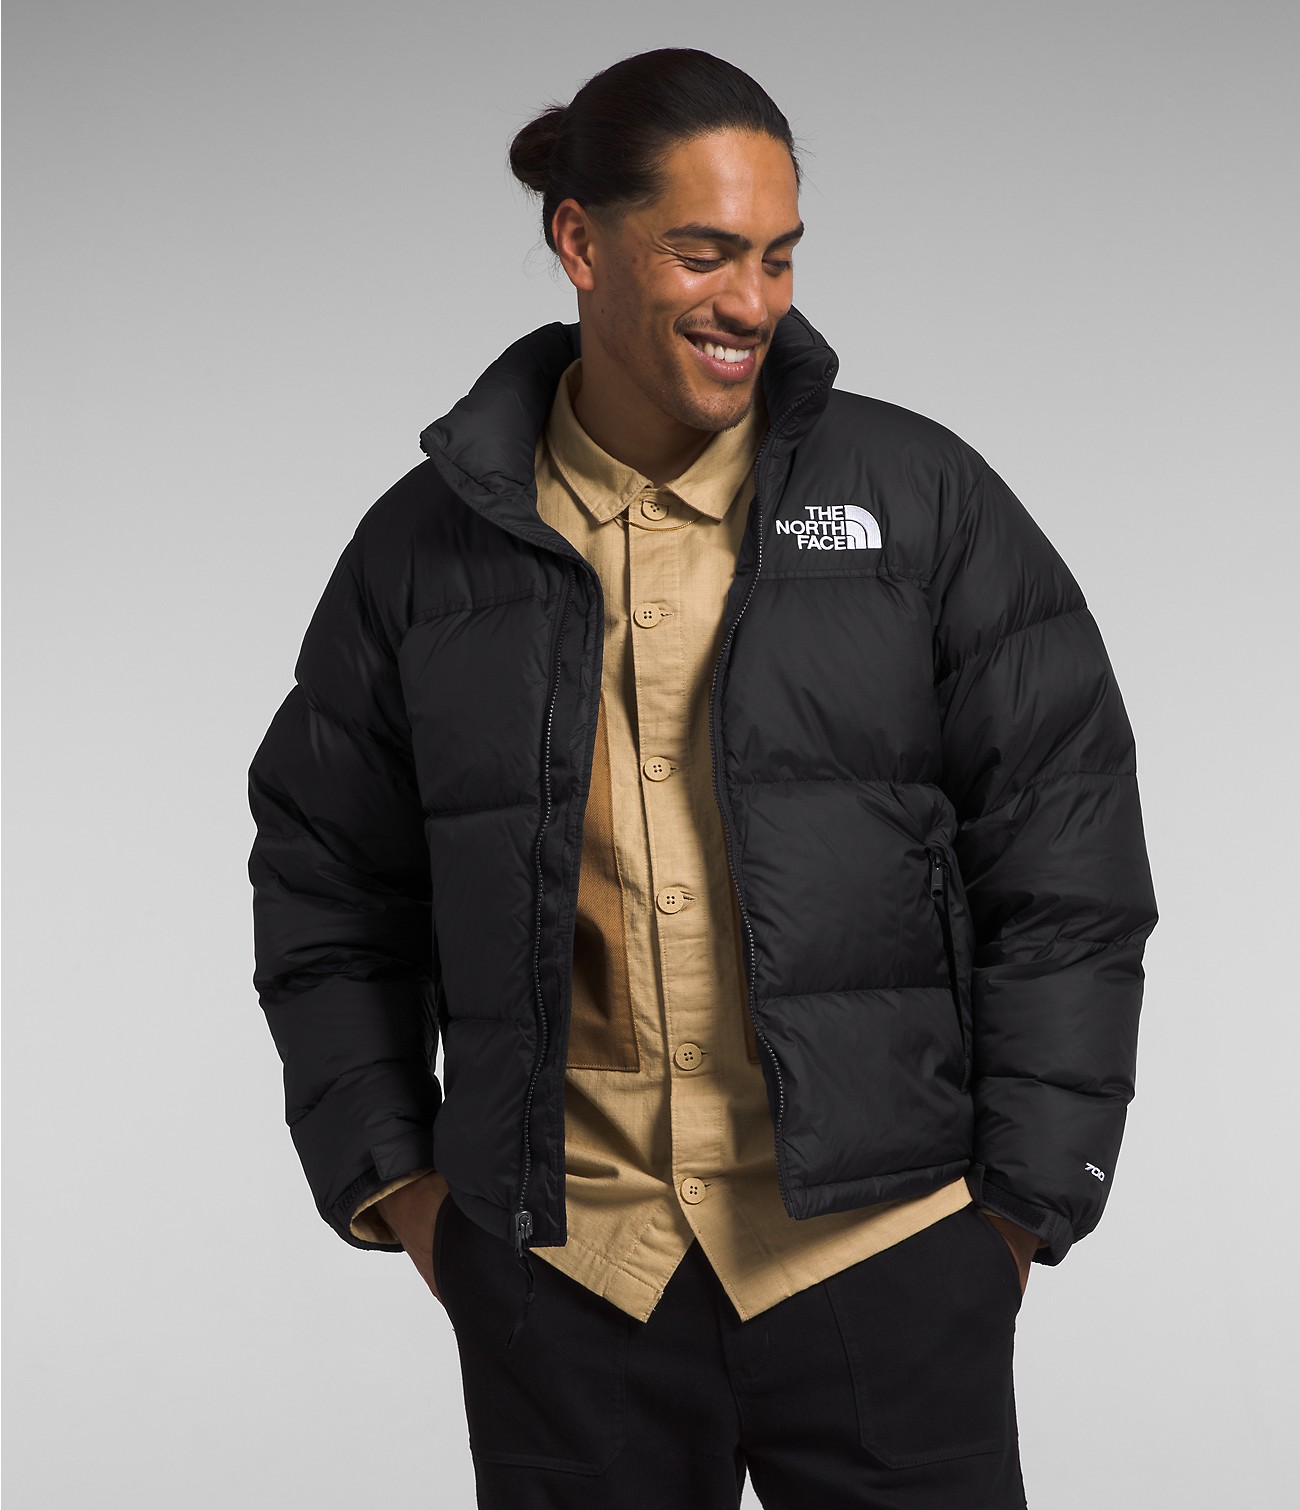 Unlock Wilderness' choice in the Marmot Vs North Face comparison, the 1996 Retro Nuptse Jacket by The North Face